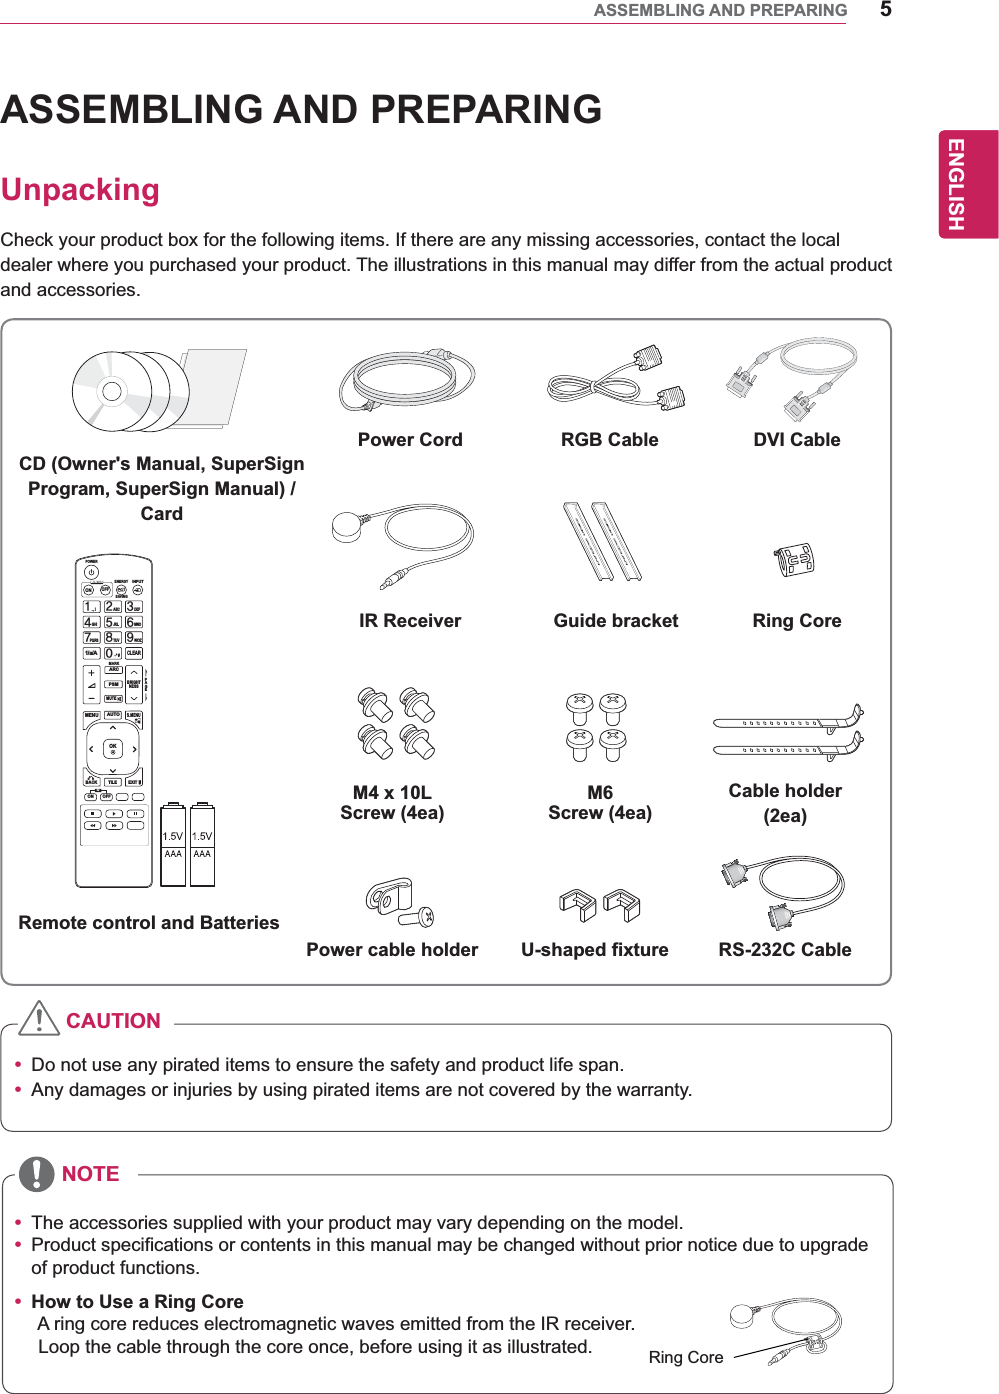 5ENGENGLISHASSEMBLING AND PREPARINGASSEMBLING AND PREPARINGUnpackingCheck your product box for the following items. If there are any missing accessories, contact the local dealer where you purchased your product. The illustrations in this manual may differ from the actual product and accessories.y Do not use any pirated items to ensure the safety and product life span.y Any damages or injuries by using pirated items are not covered by the warranty. y The accessories supplied with your product may vary depending on the model.y Product specifications or contents in this manual may be changed without prior notice due to upgrade of product functions.y How to Use a Ring Core       A ring core reduces electromagnetic waves emitted from the IR receiver.       Loop the cable through the core once, before using it as illustrated.CAUTIONNOTEPAGEINPUTENERGYSAVINGMARKARCONOFF. , !ABCDEFGHIJKLMNOPQRSTUV1/a/A- * #WXYZCLEARMONITORPSMAUTOMUTEBRIGHTNESSMENUPOWEROKS.MENUIDBACK TILEON OFFEXITRemote control and BatteriesPower Cord DVI CableIR Receiver Guide bracketM4 x 10L Screw (4ea)Power cable holder U-shaped fixture RS-232C CableM6 Screw (4ea)Ring CoreCable holder(2ea)RGB CableRing CoreCD (Owner&apos;s Manual, SuperSign Program, SuperSign Manual) /Card